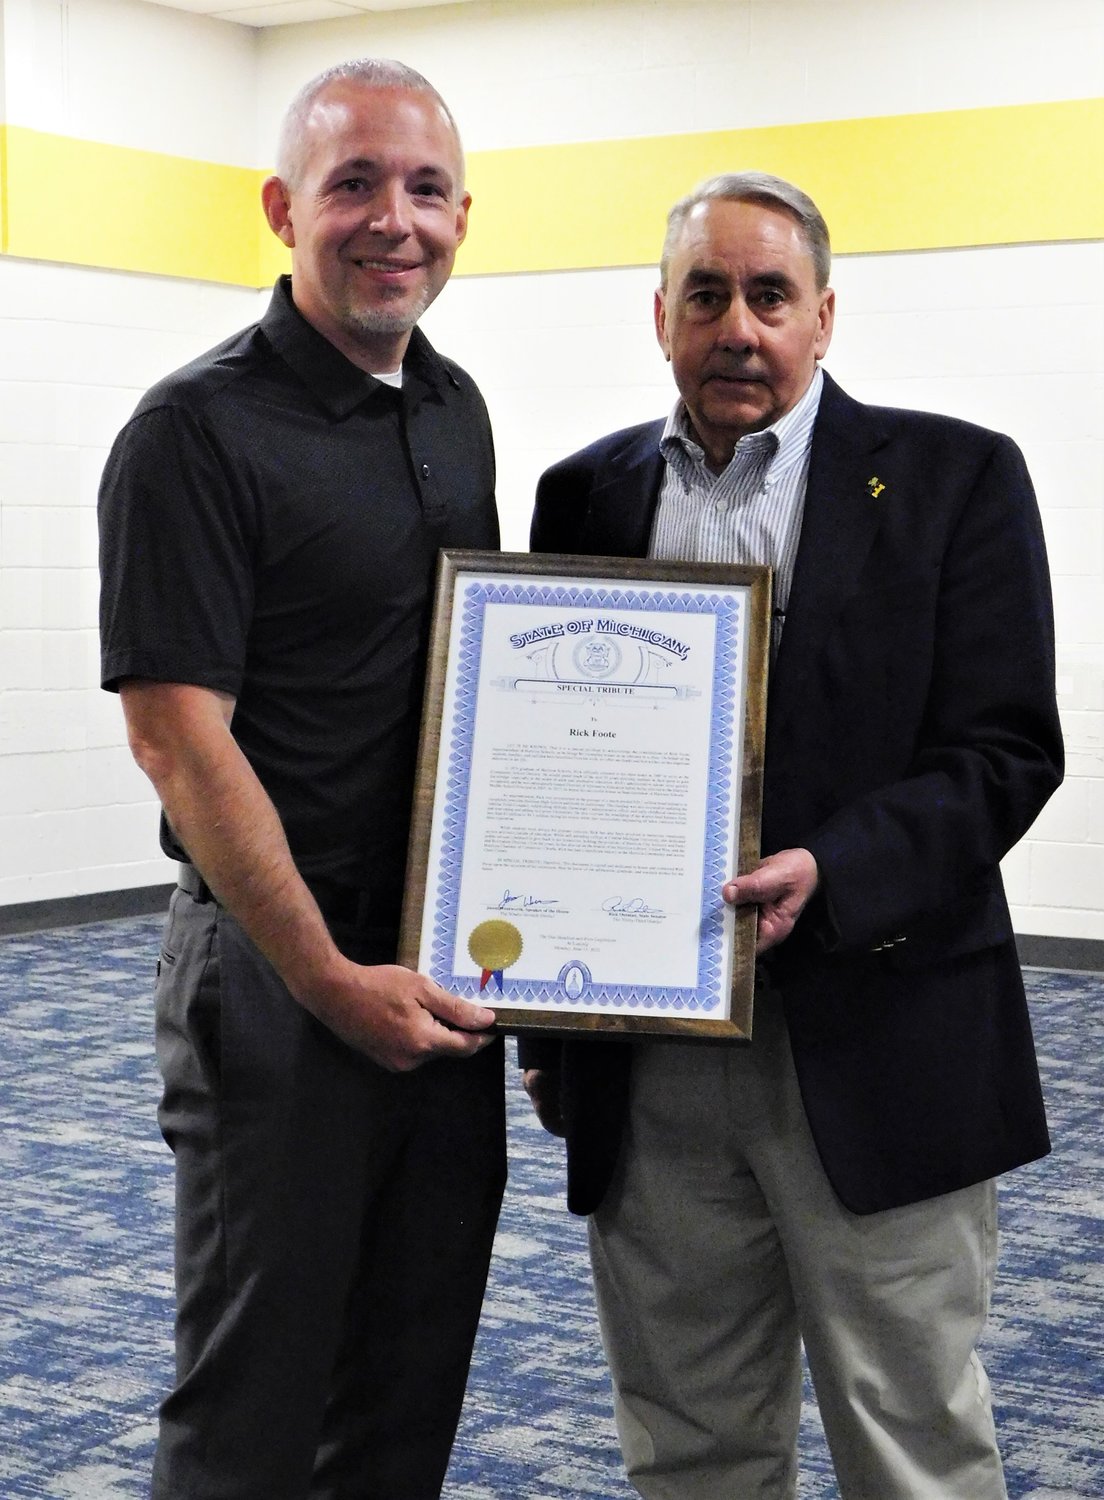 Michigan Speaker of the House Jason Wentworth presents a State of Michigan Special Tribute proclamation to Harrison Community Schools Superintendent Rick Foote during a school celebration held in honor of his career in education